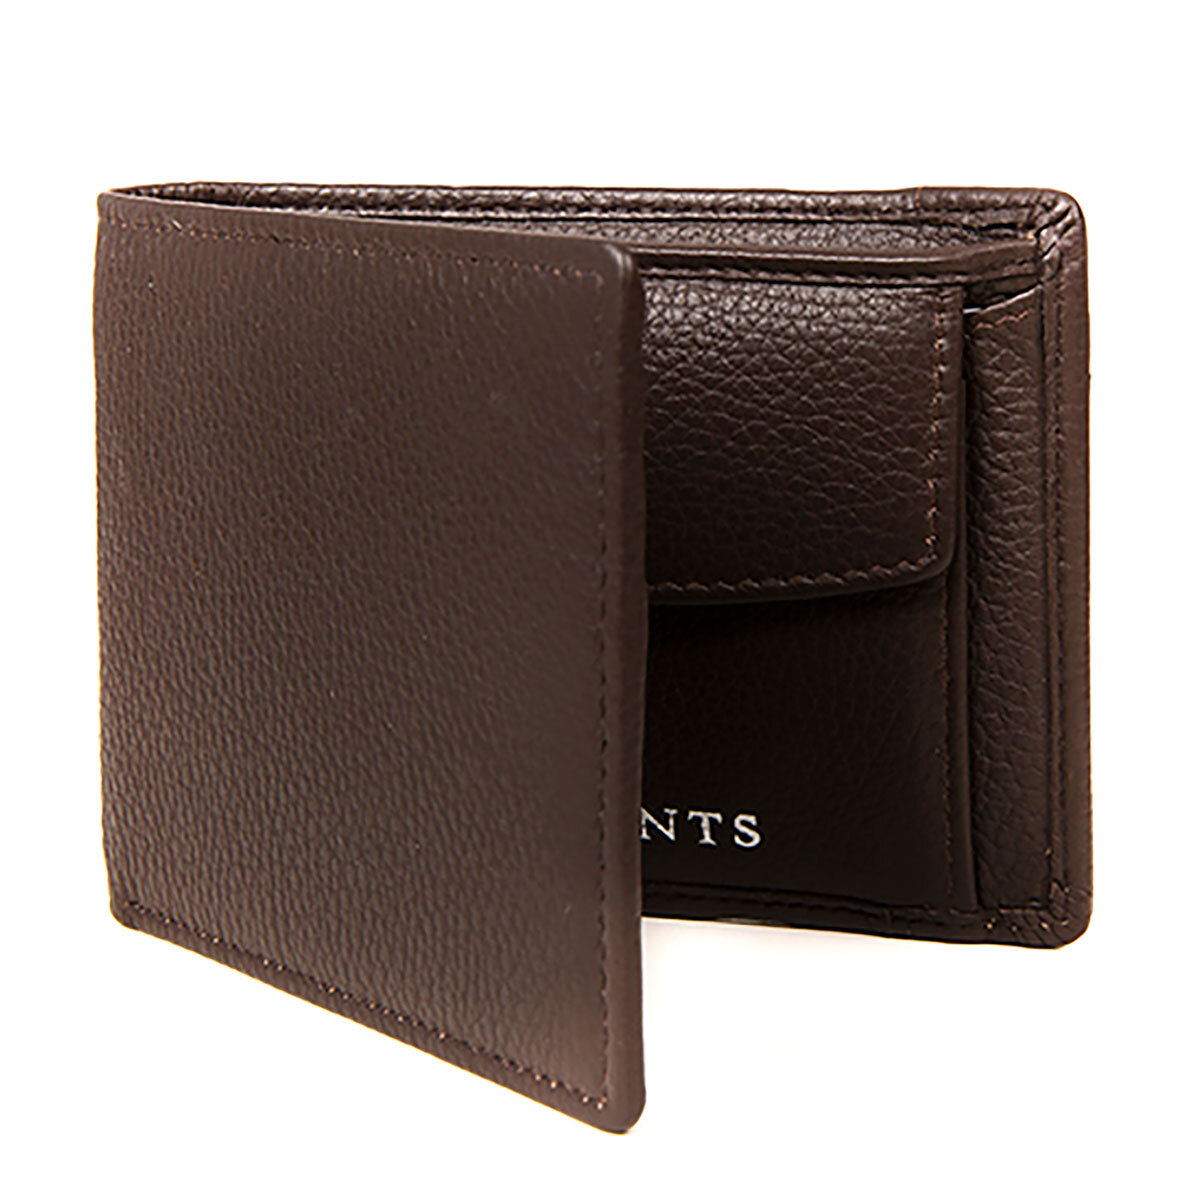 Dents Pebble Grain Leather Billfold Wallet with Removable Card Holder in 2 Colours